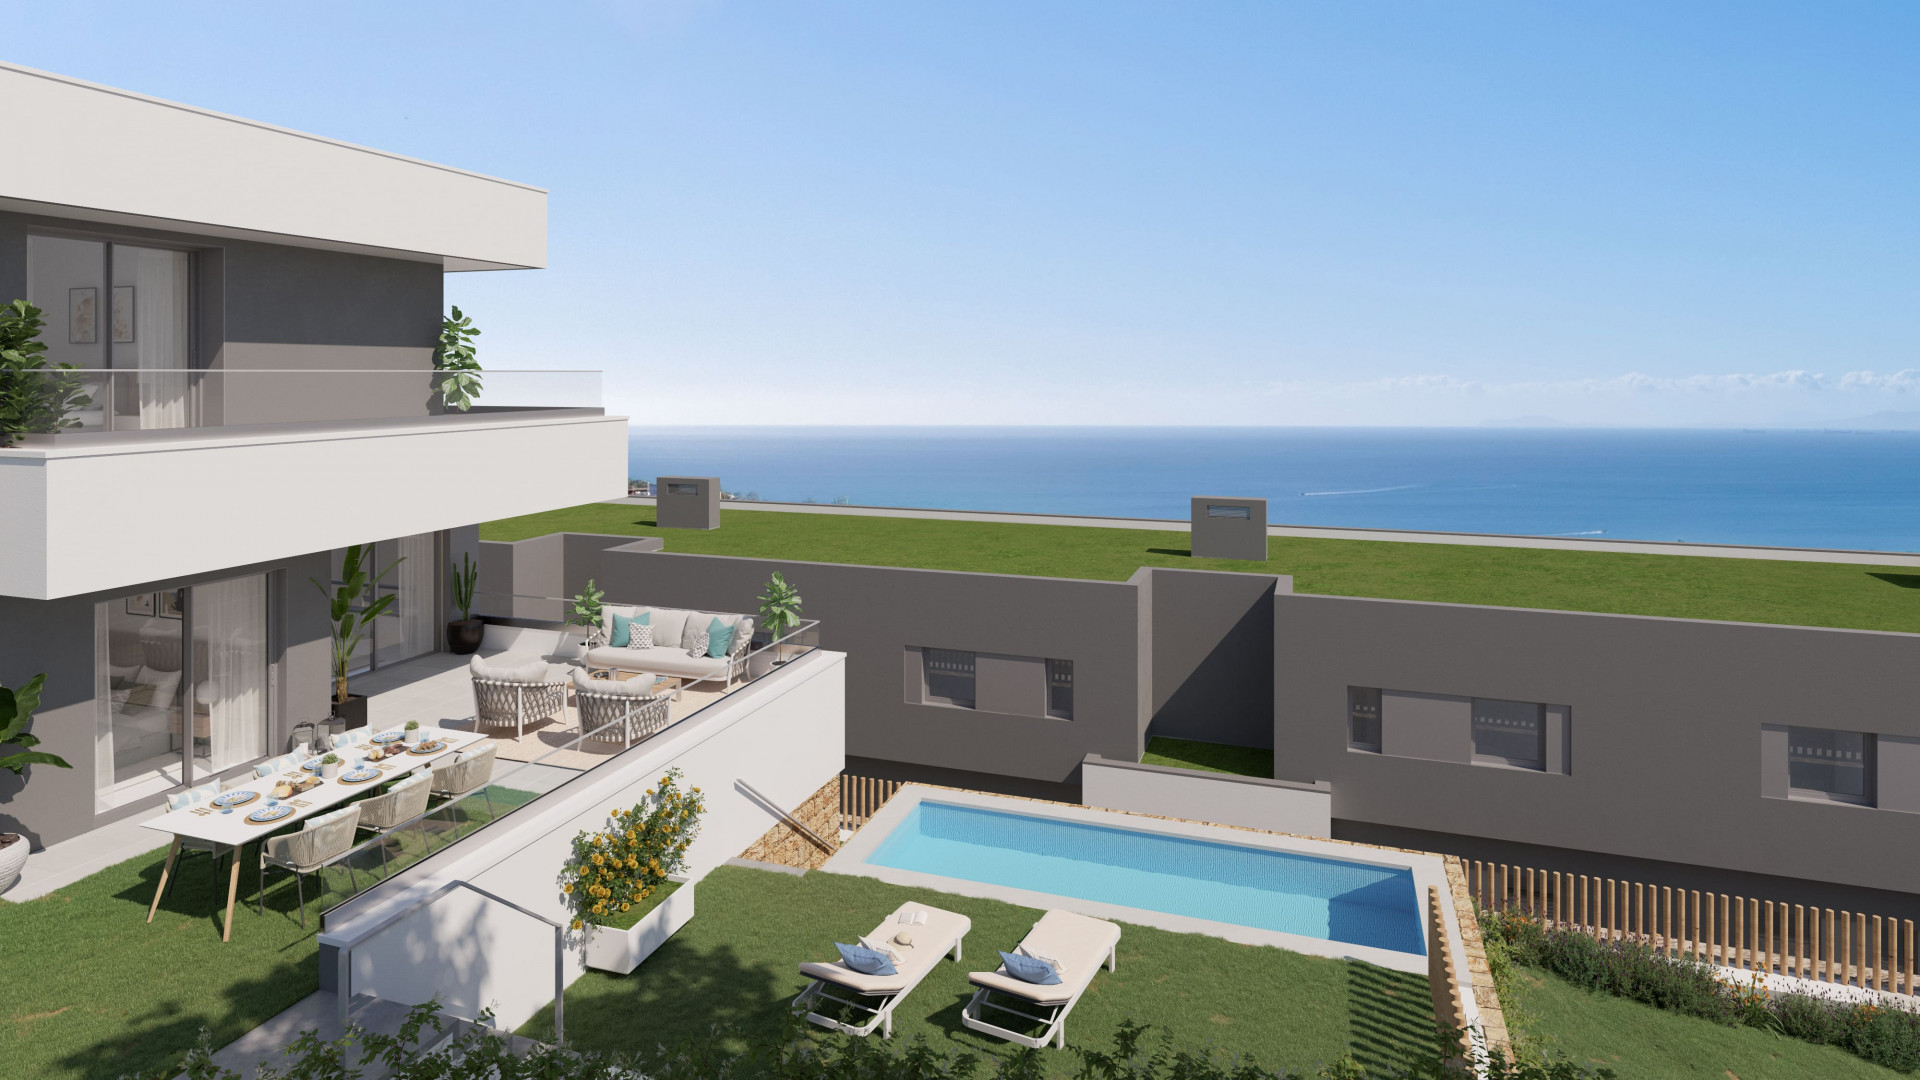 Blue Marine: Residential project in Manilva of semi-detached and detached houses with 3 and 4 bedrooms.